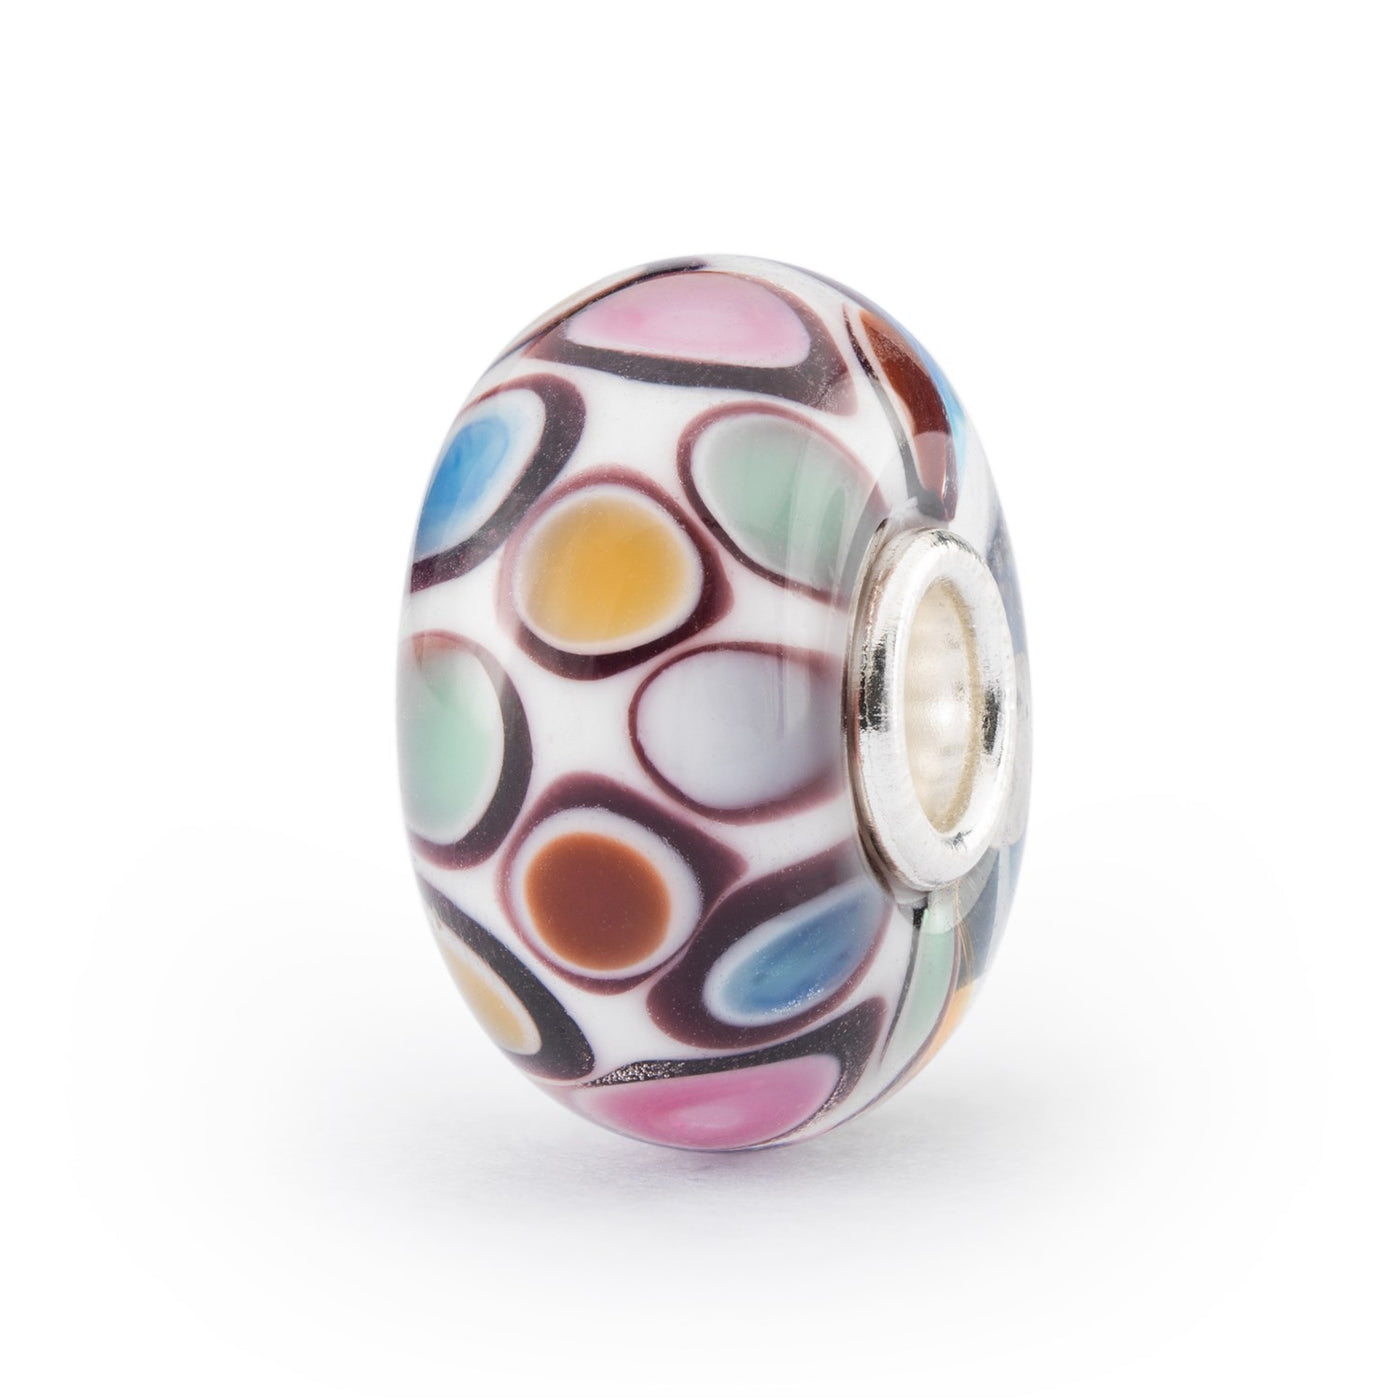 Pink, yellow, blue and pale green dots framed in white and black spread over a white surface in this round glass bead.